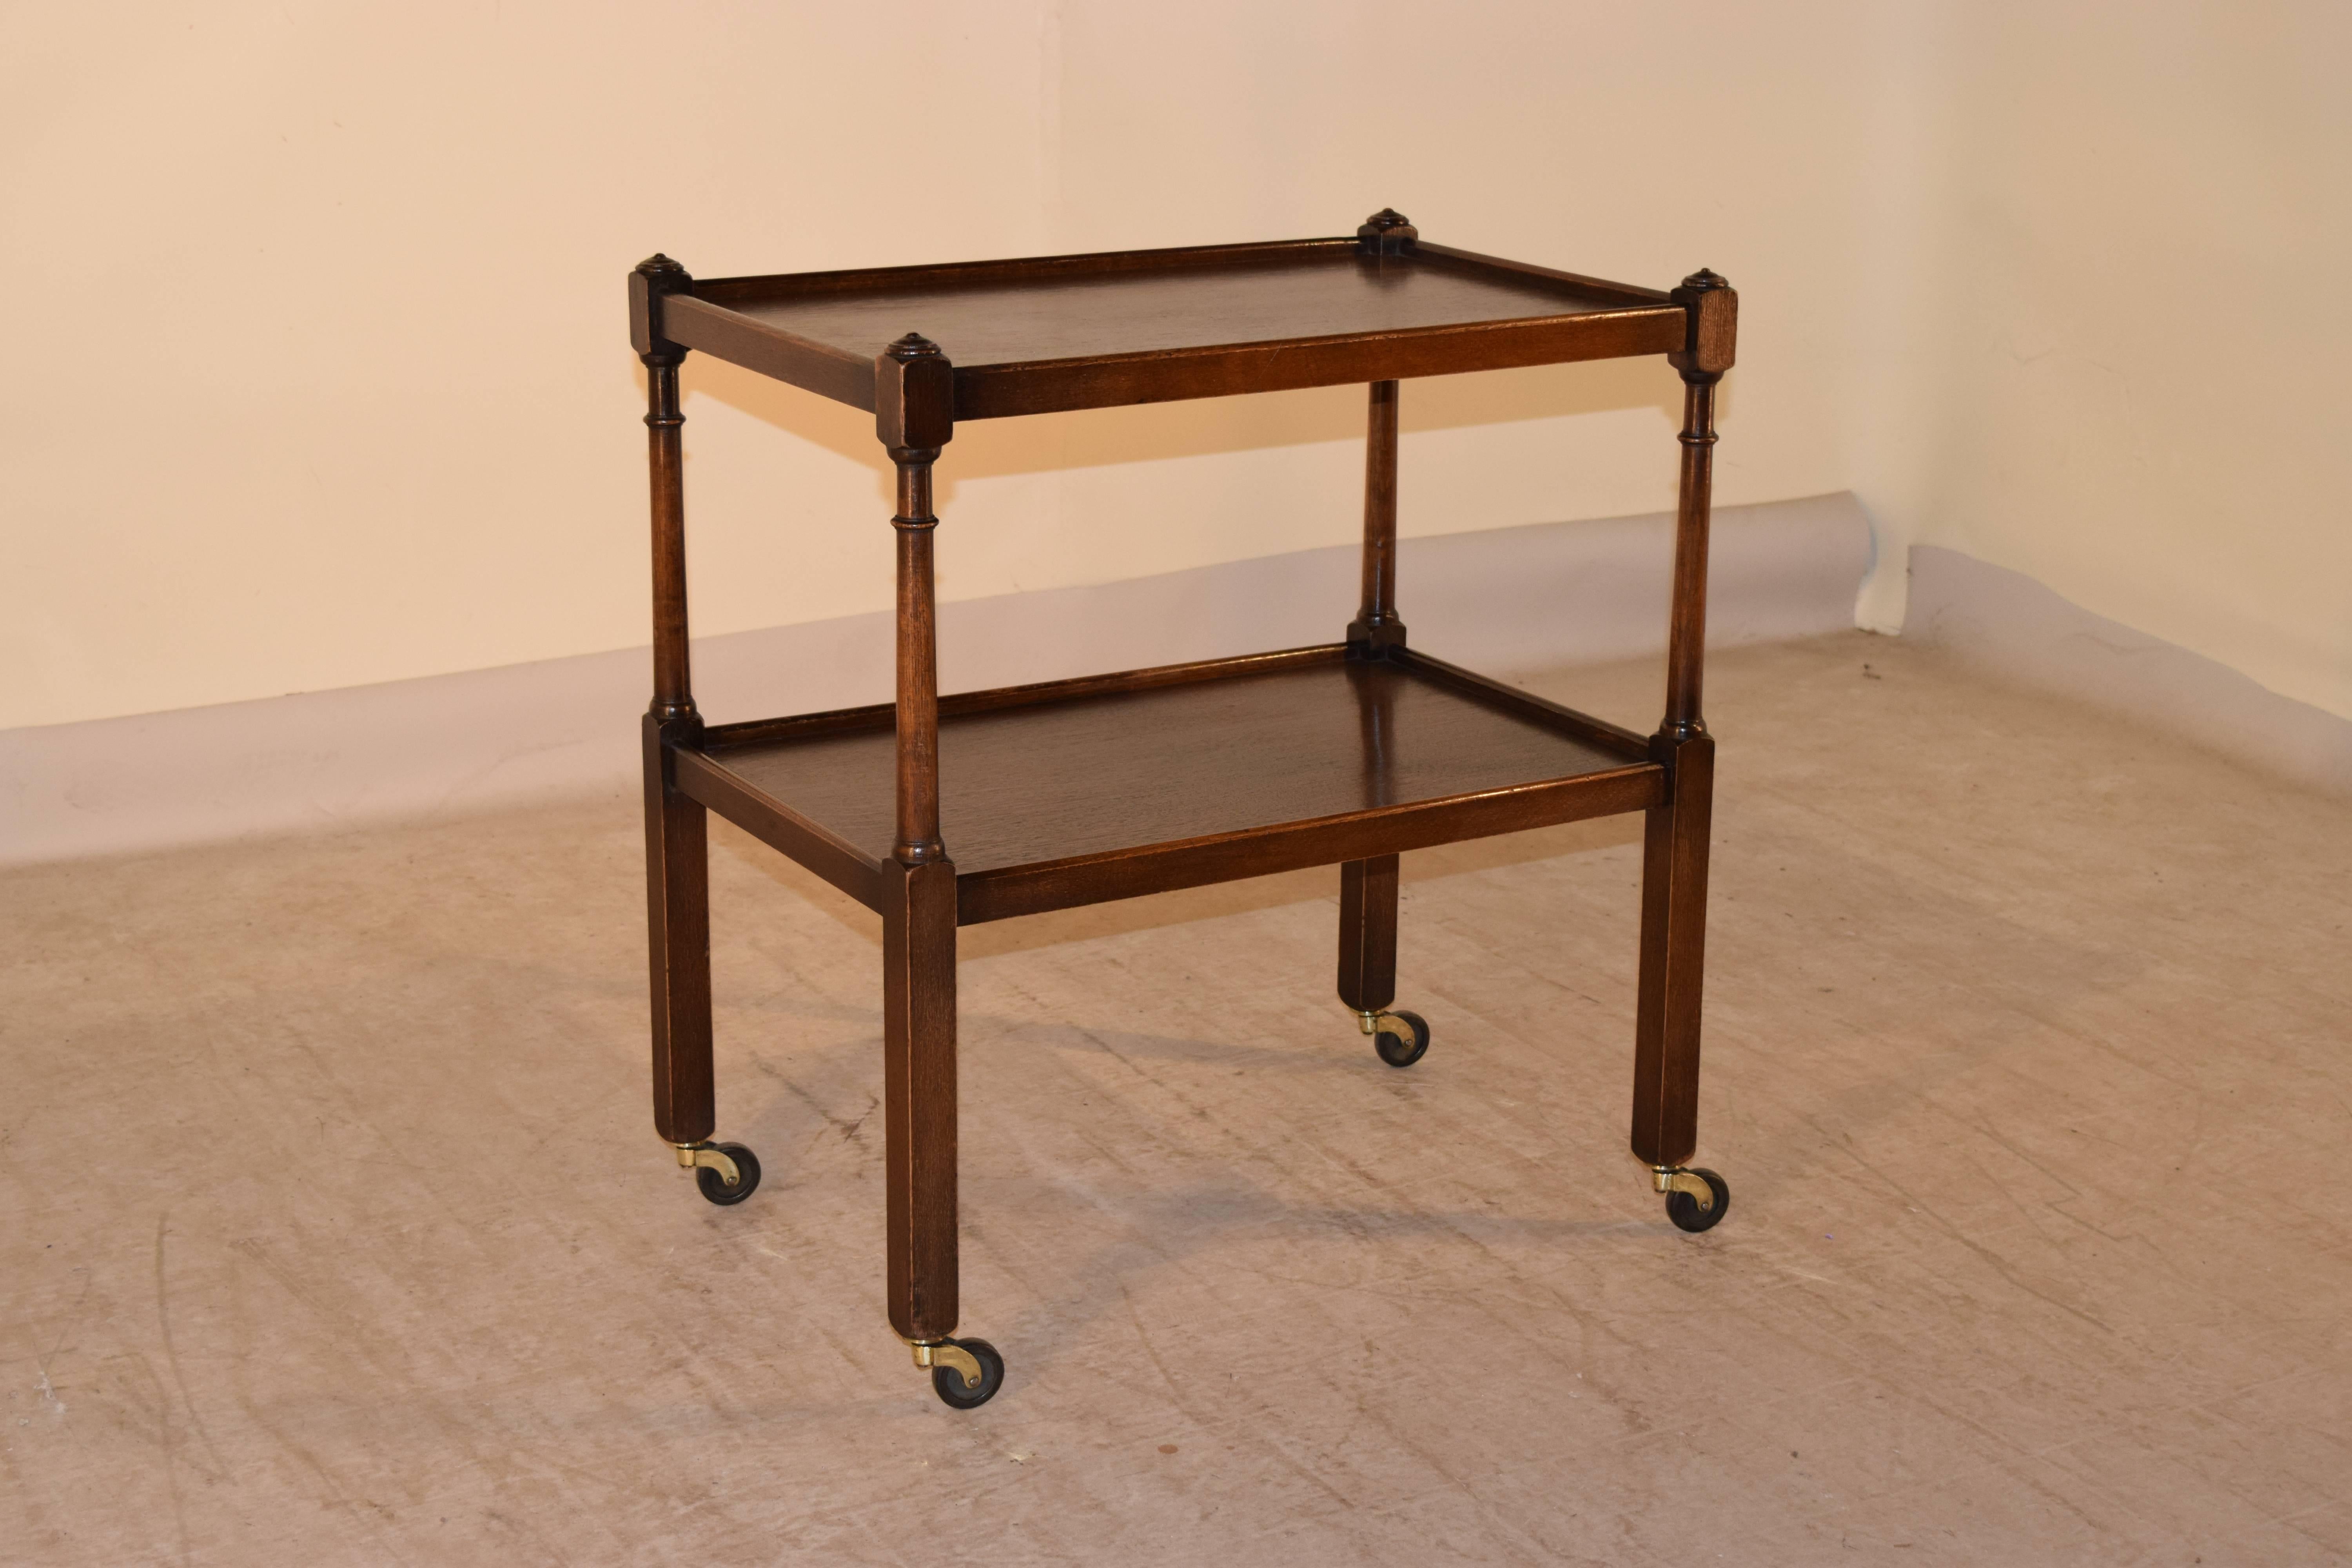 Late 19th century English oak drinks cart with two shelves, joined by hand-turned legs. Supported on casters.